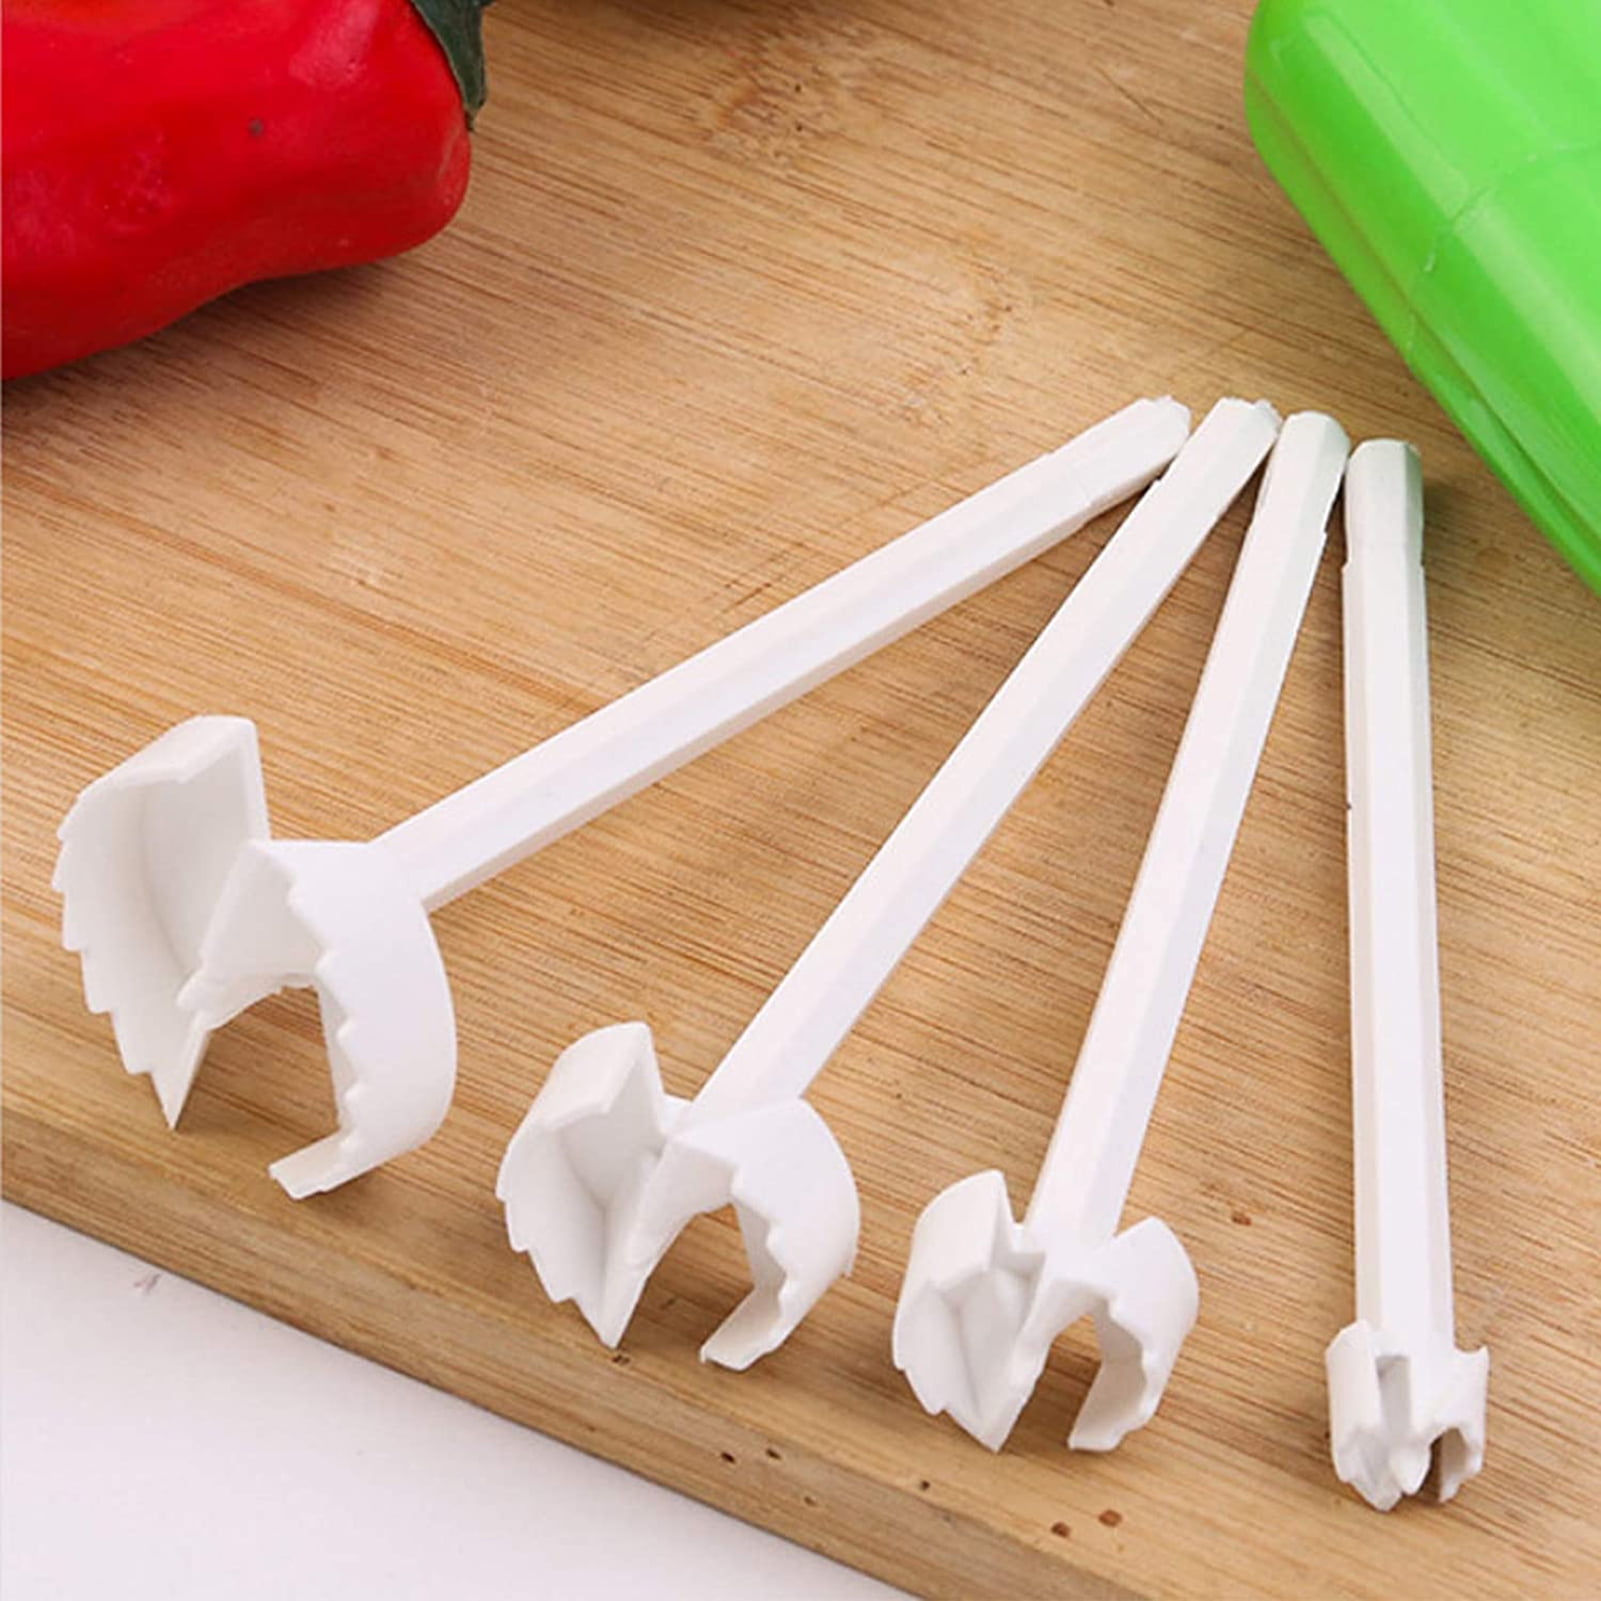 Vegetable Carving Tools Flipkart Electric Scale Scraper Machine Egg Beater  Vegetable Core Digger Hole Digger With 2 Cutter Handle Spiralizer Fruit  Corer Tool 230511 From Kong08, $18.63